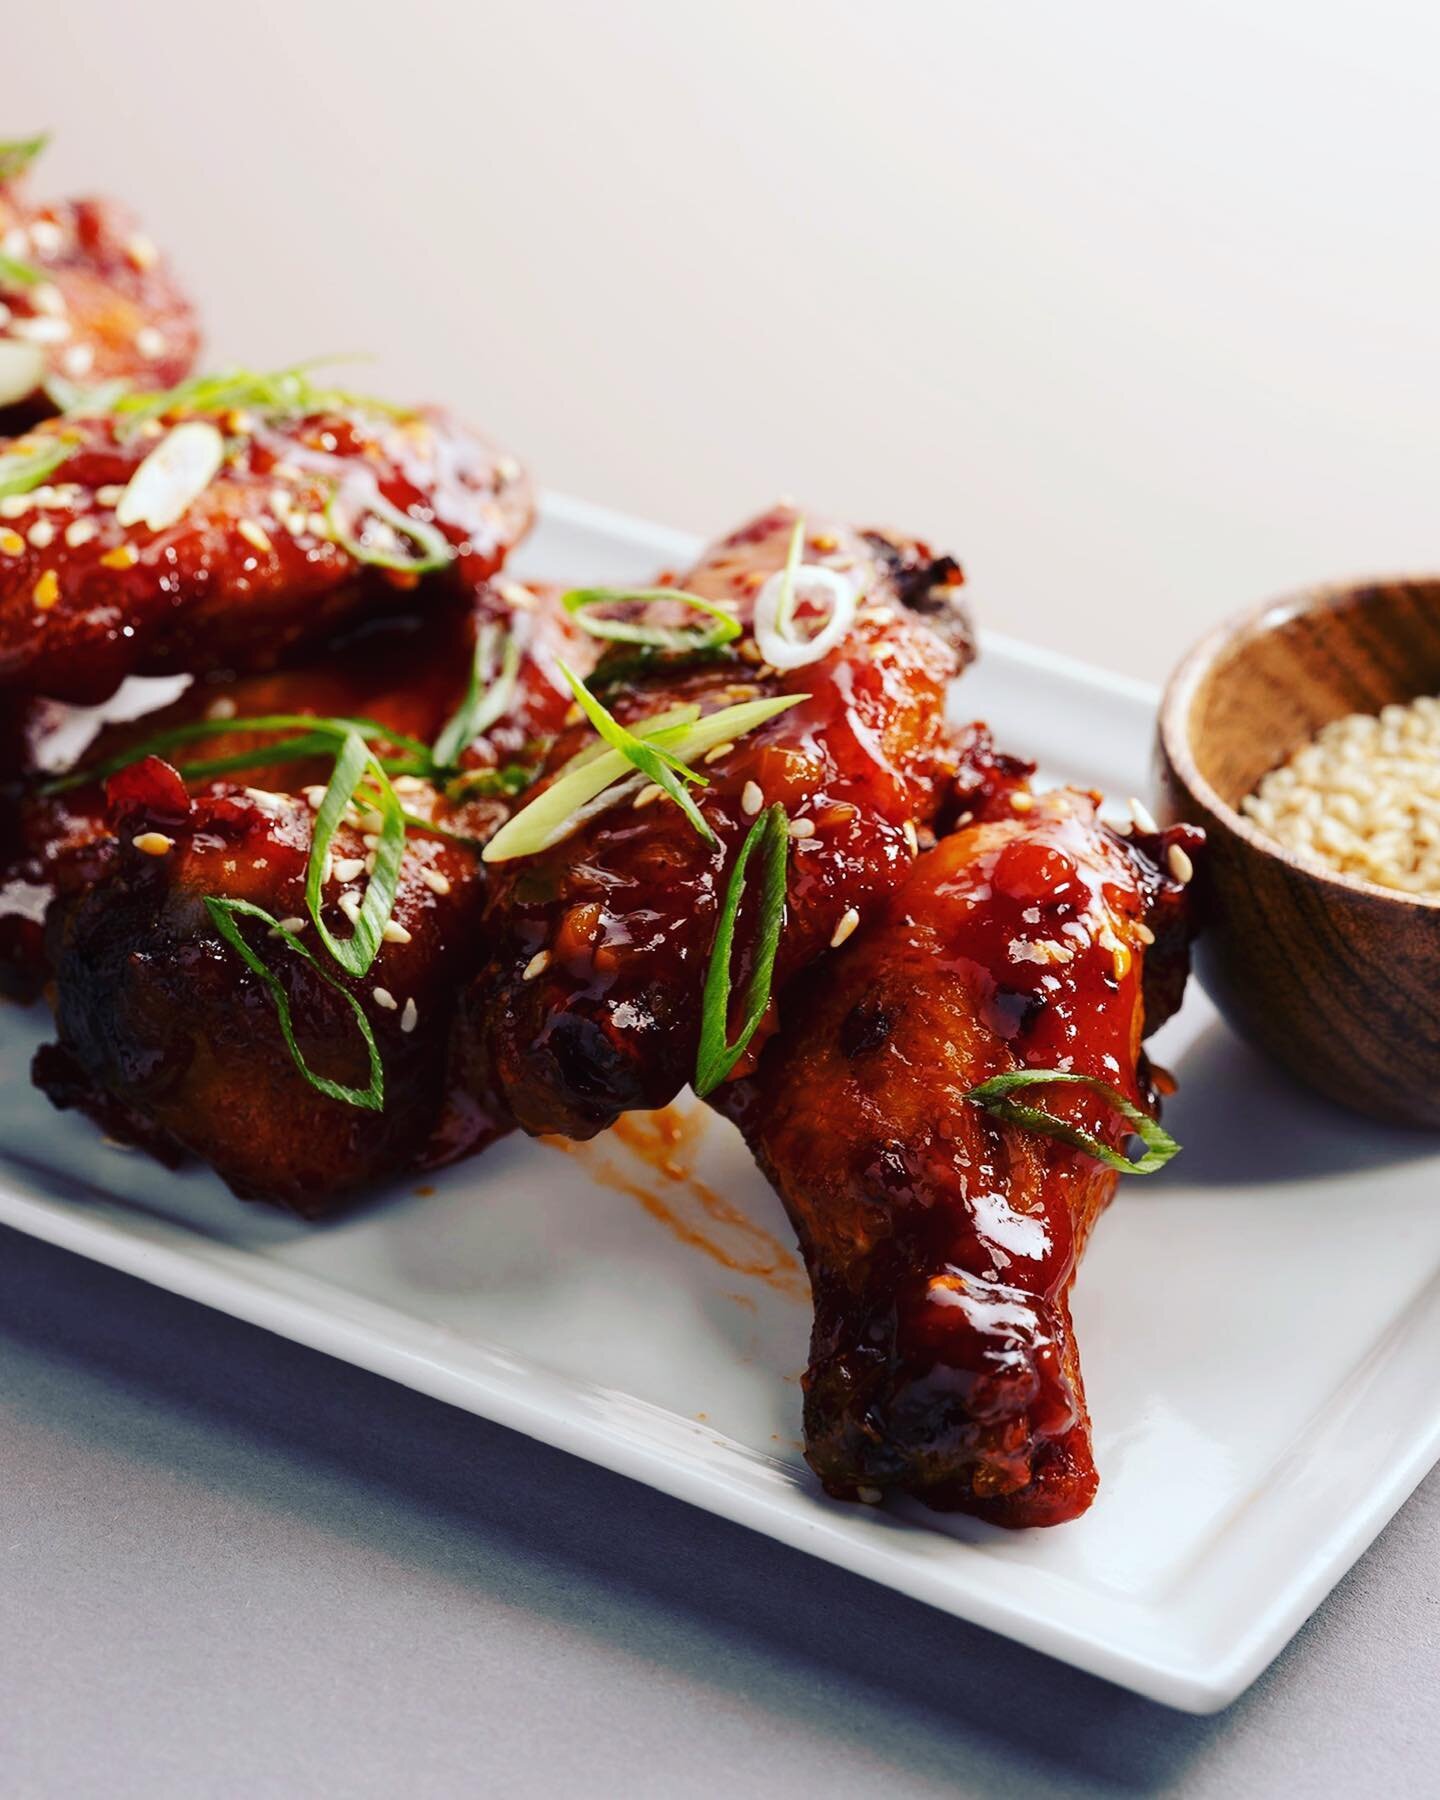 Superbowl LV!  20 wings for $20!
$40 Shareable, chips &amp; guacamole, Bbq Ribs &amp; Sliders!  Seamless doordash grubhub